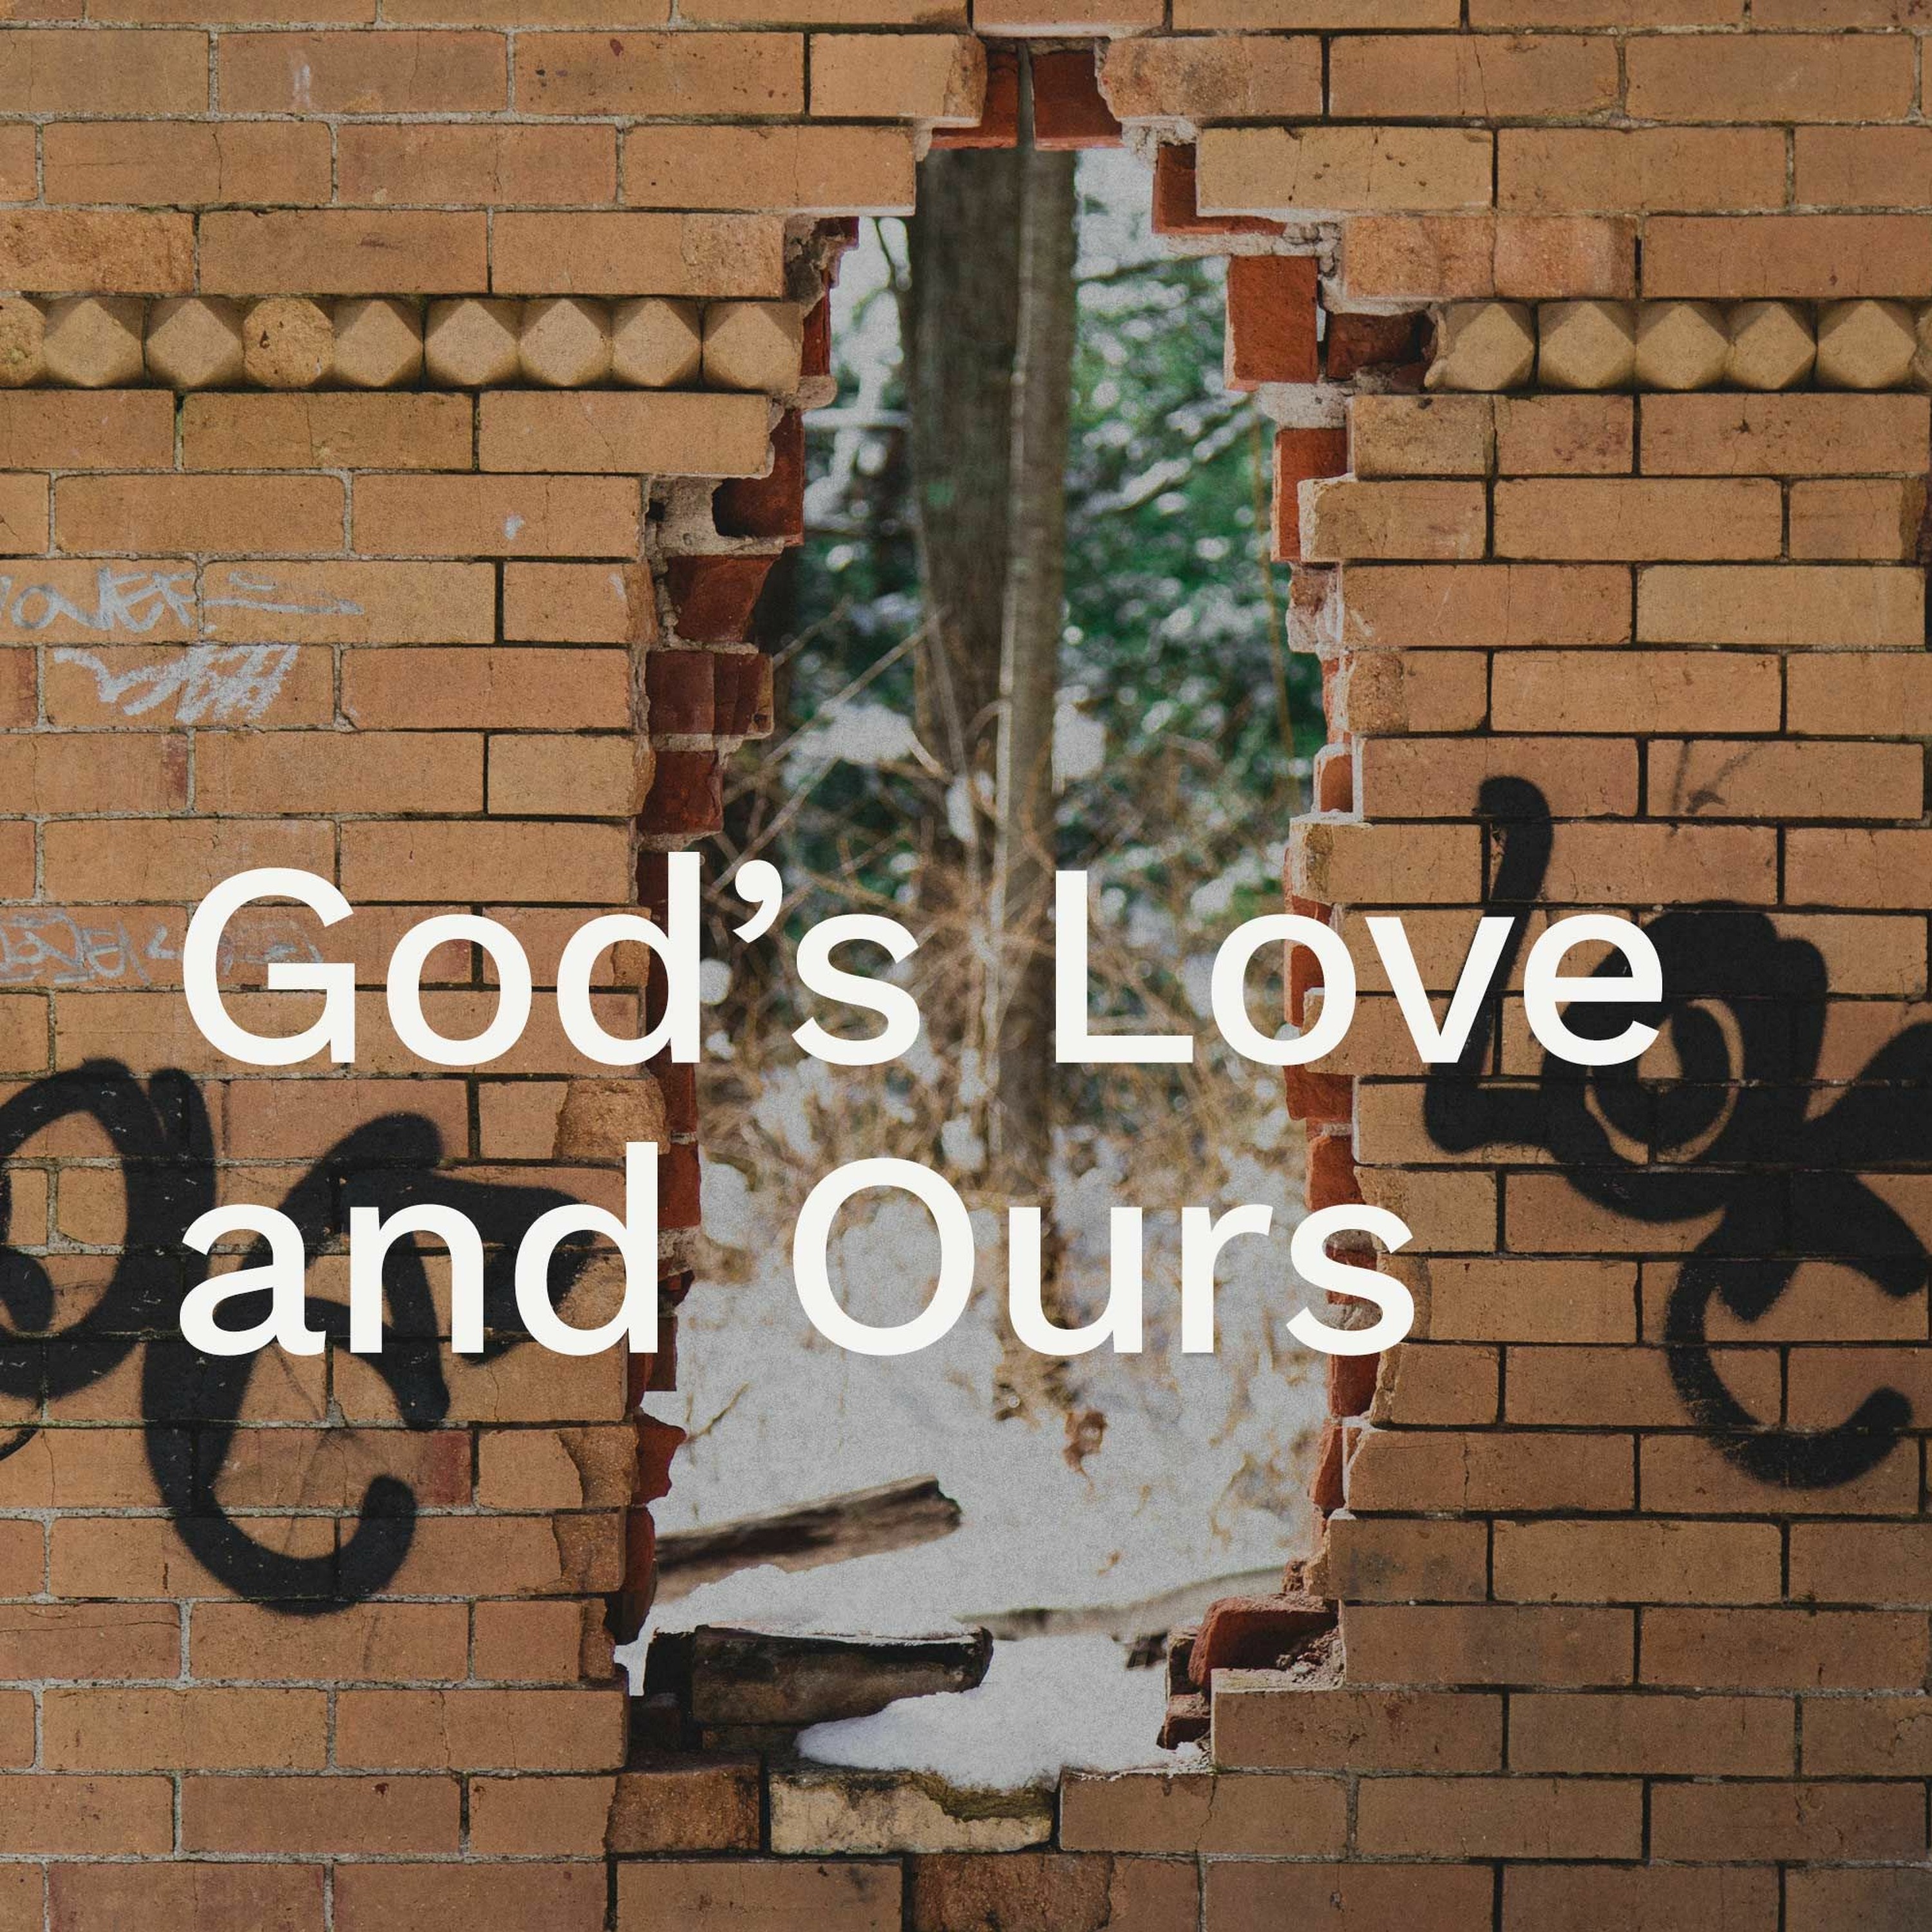 ’God’s Love and Ours’ / Neil Dawson